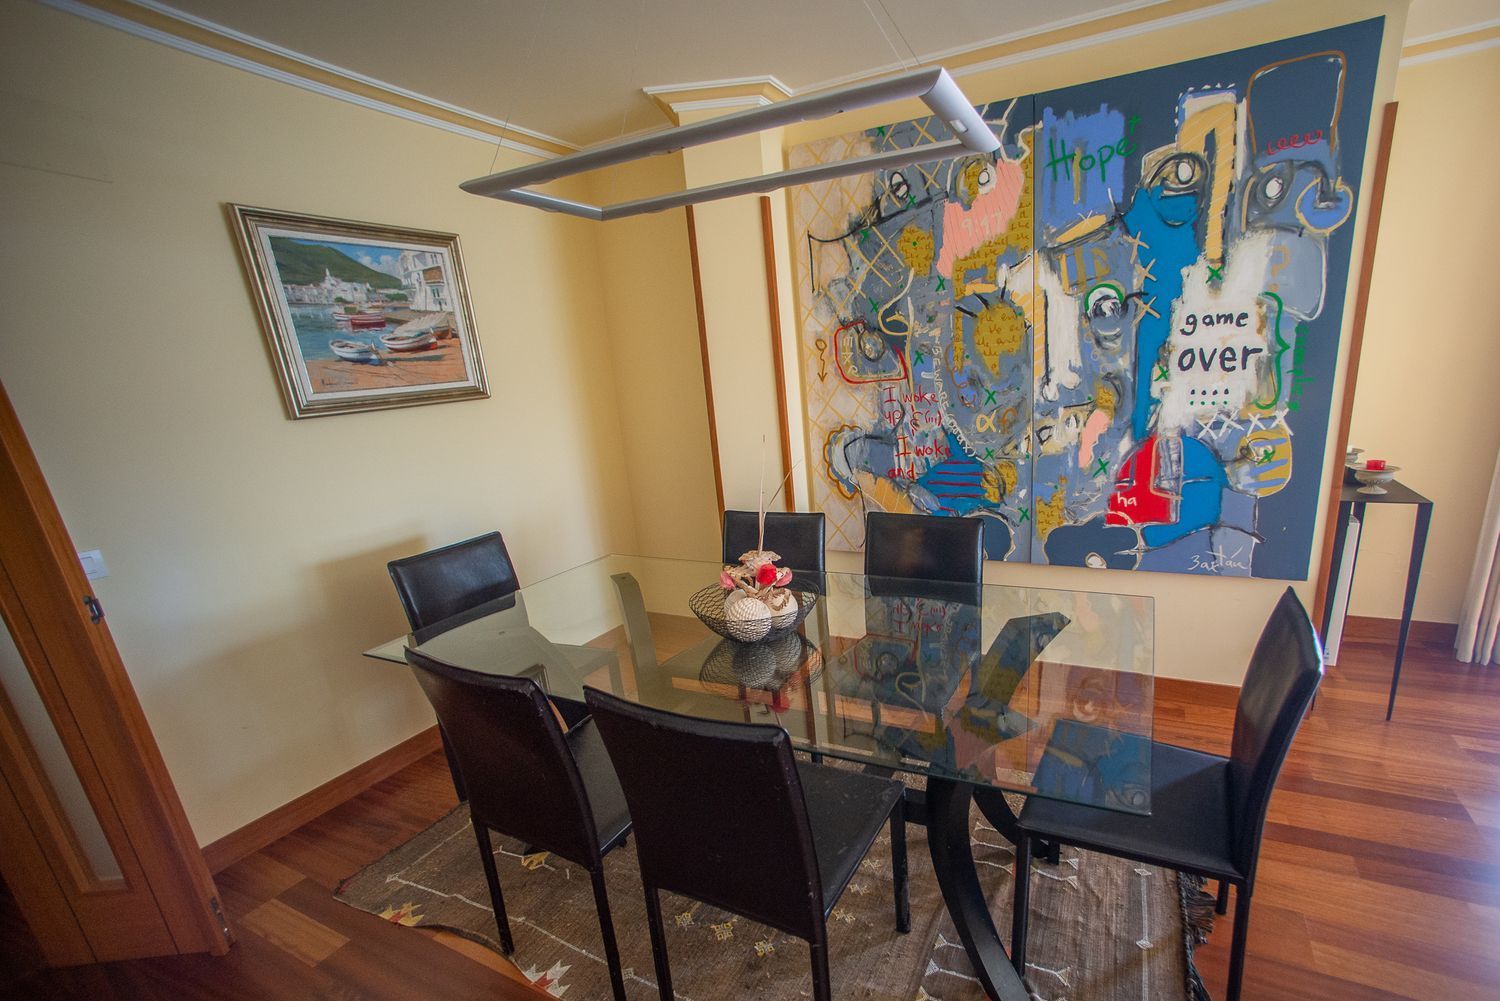 Apartment for sale on the seafront on Calle de Madrid, in Sanxenxo